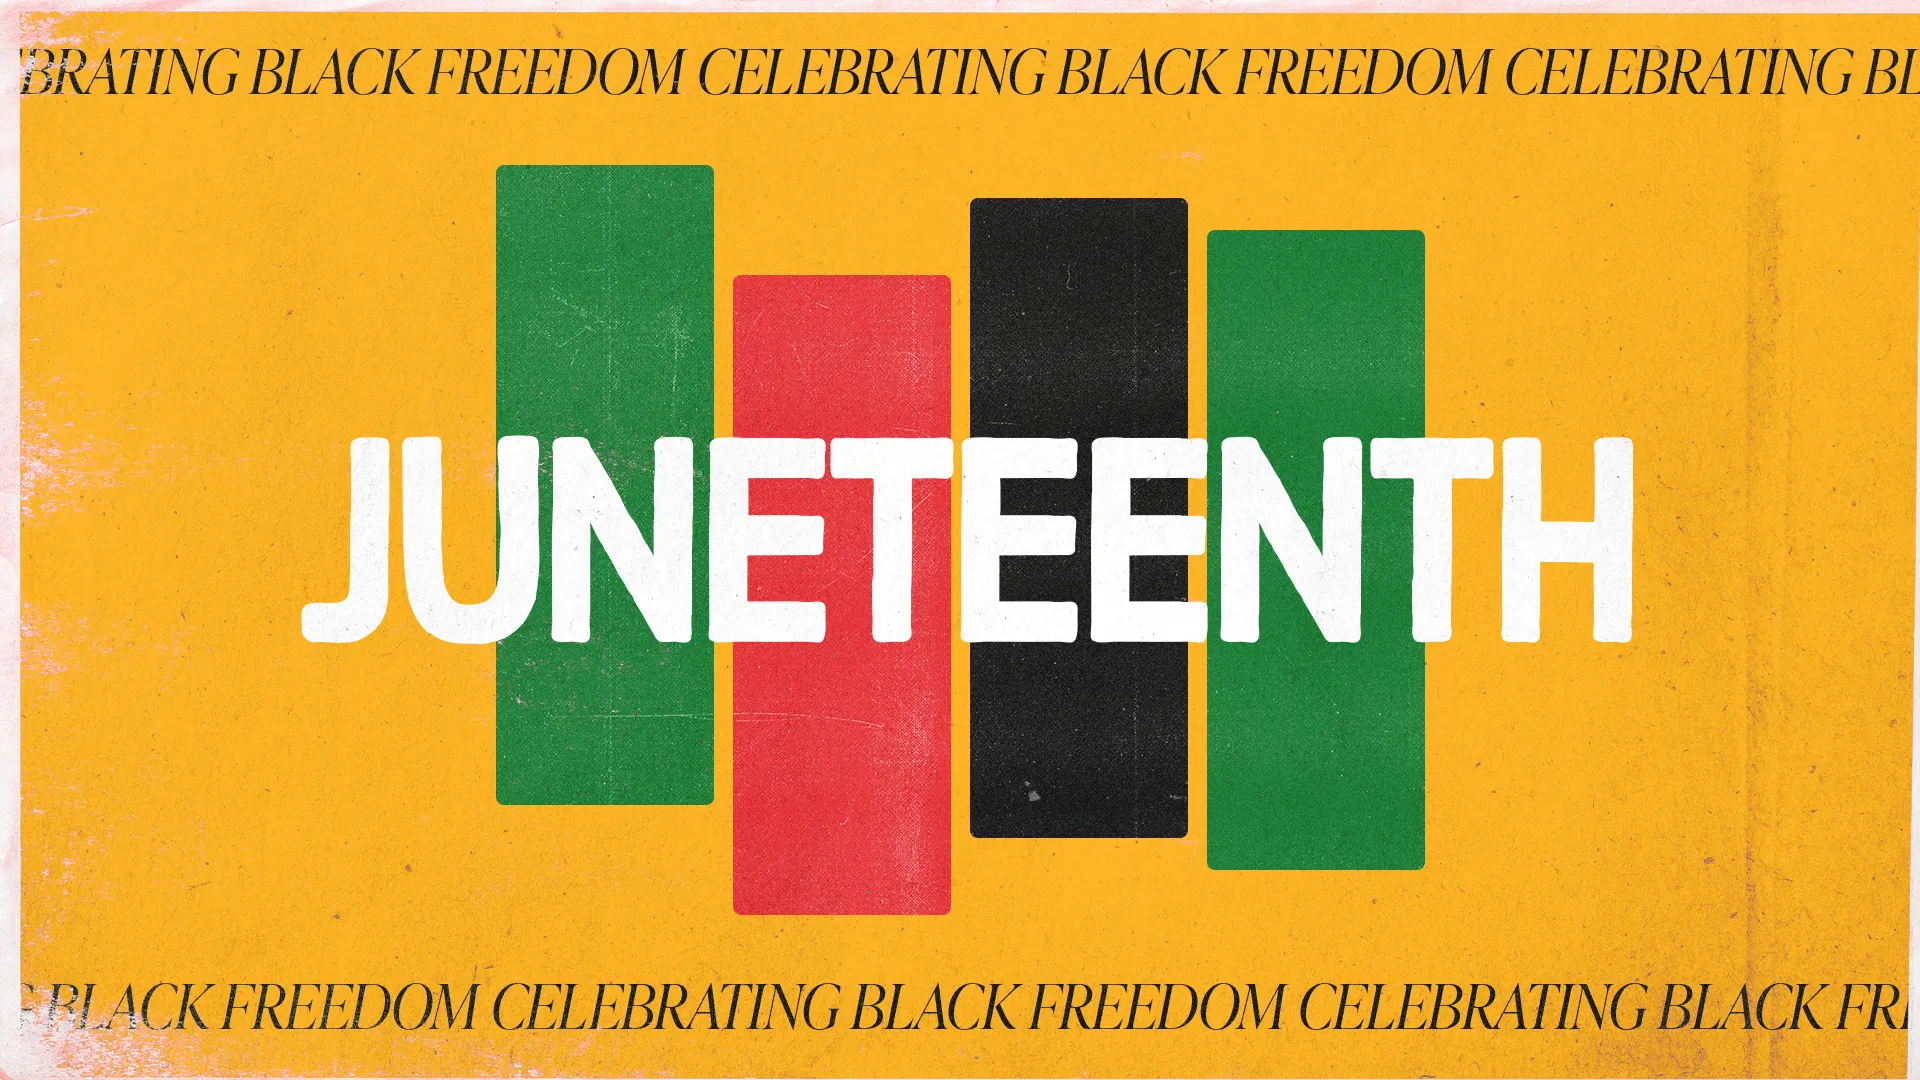 Celebrate And Reflect On Juneteenth With This Dynamic Graphic, Which Boldly Commemorates This Pivotal Moment In History, Perfect For Engaging And Educating Your Church Community On The Significance Of This Day.